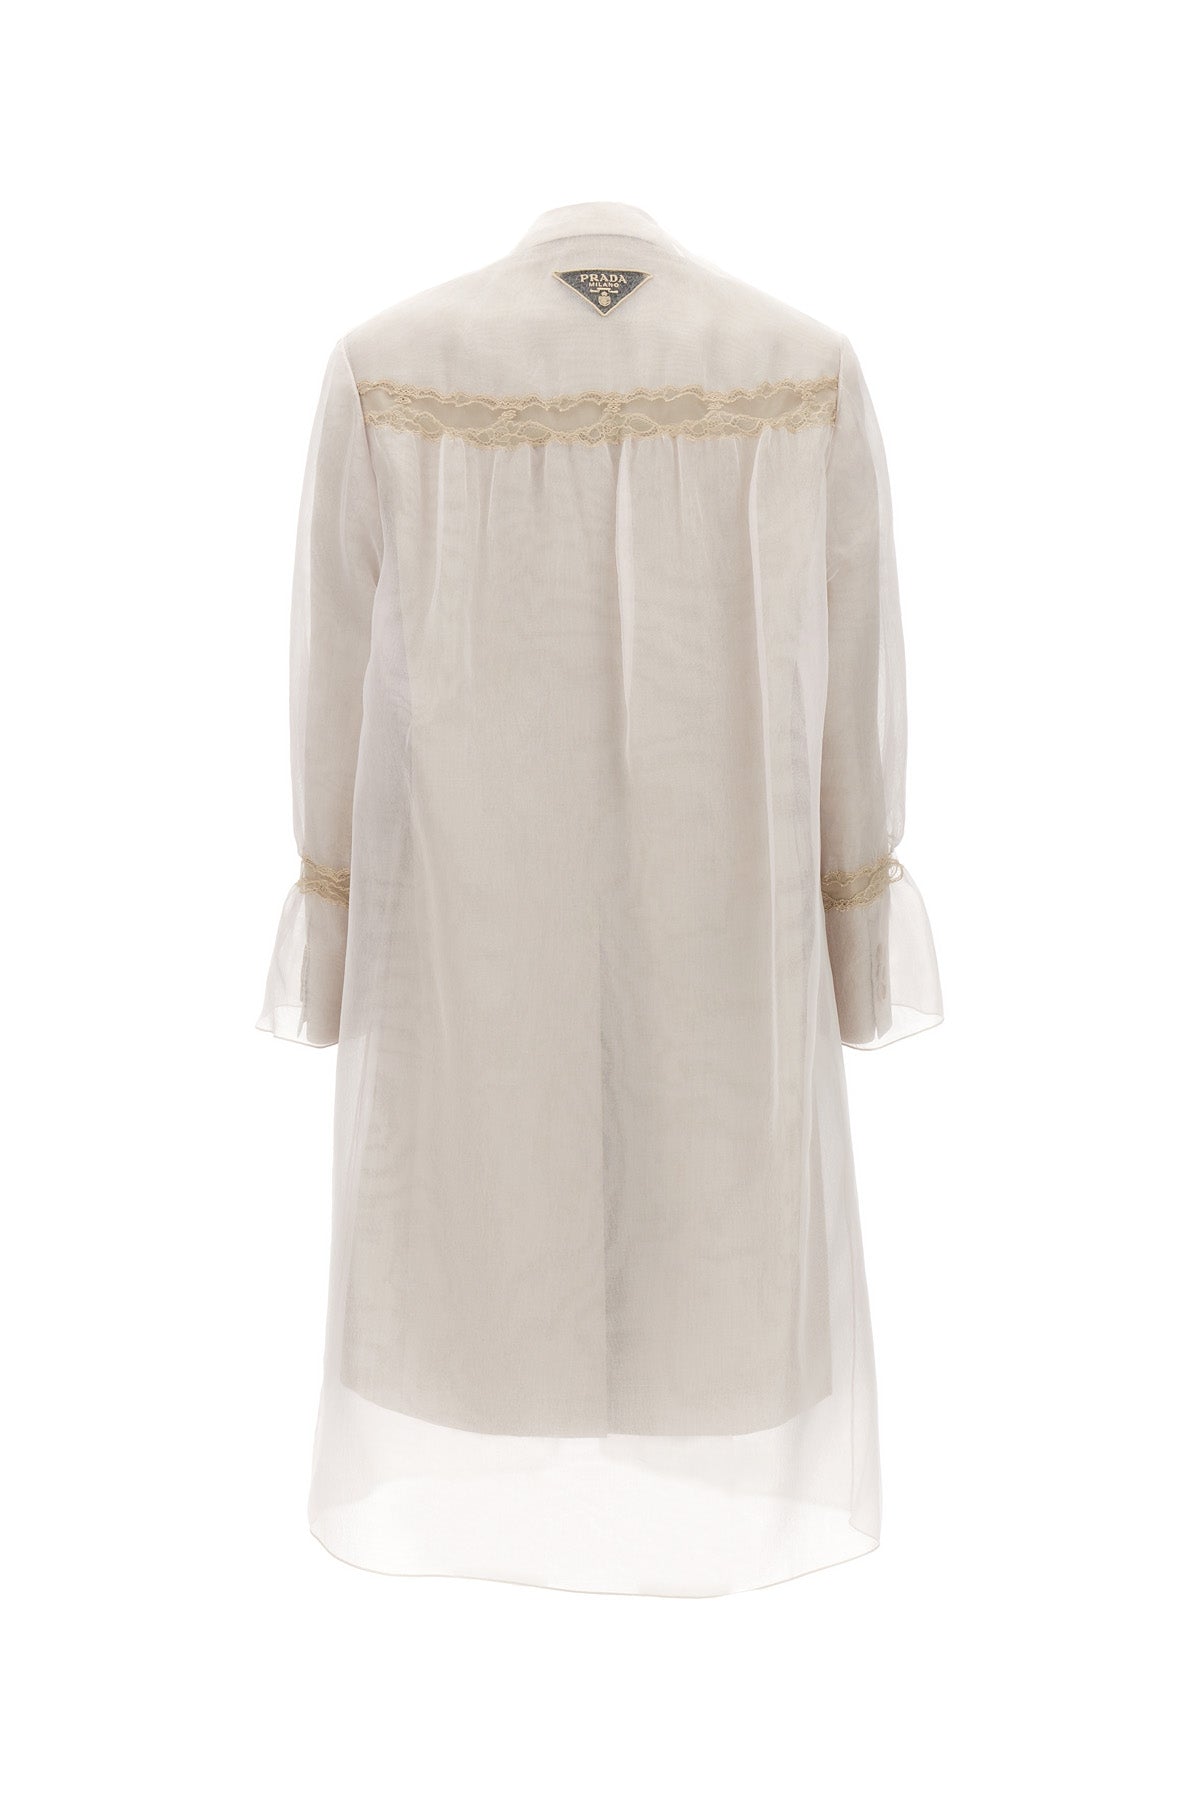 PRADA TRENCH 'NIGHTGOWN OUTDOOR'